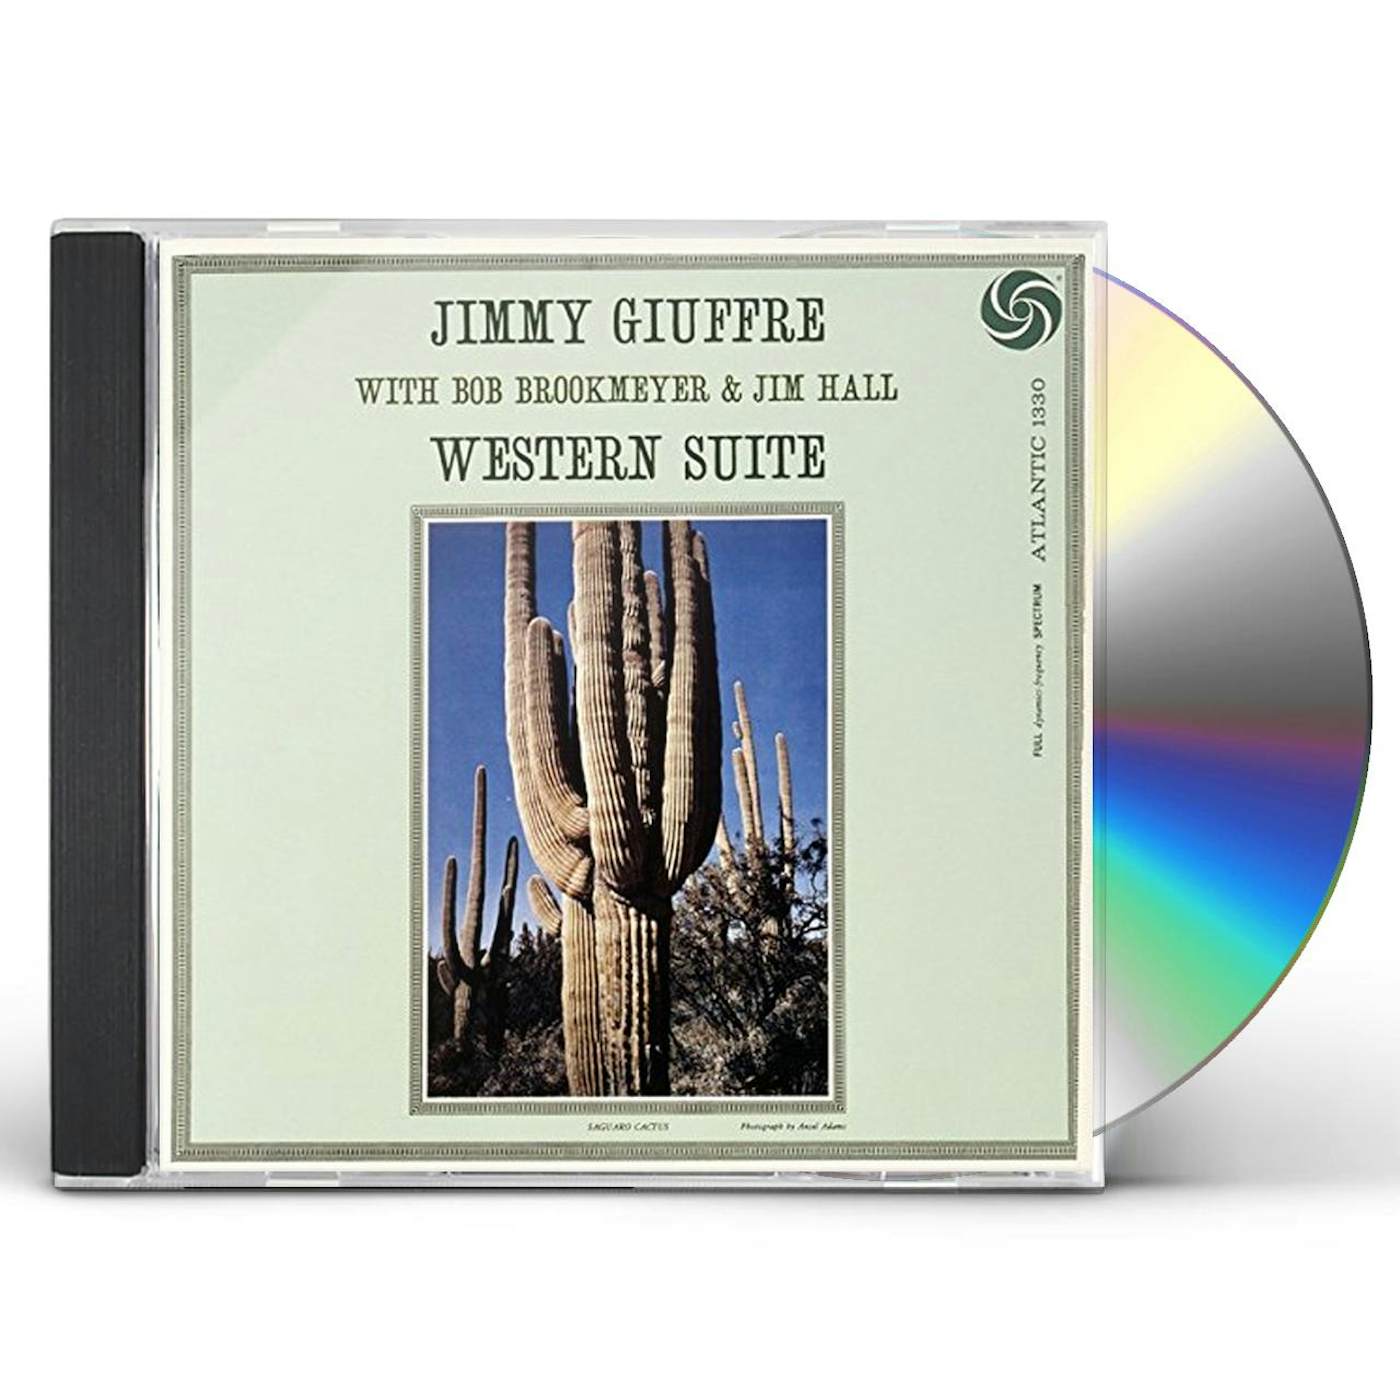 Jimmy Giuffre WESTERN SUITE CD